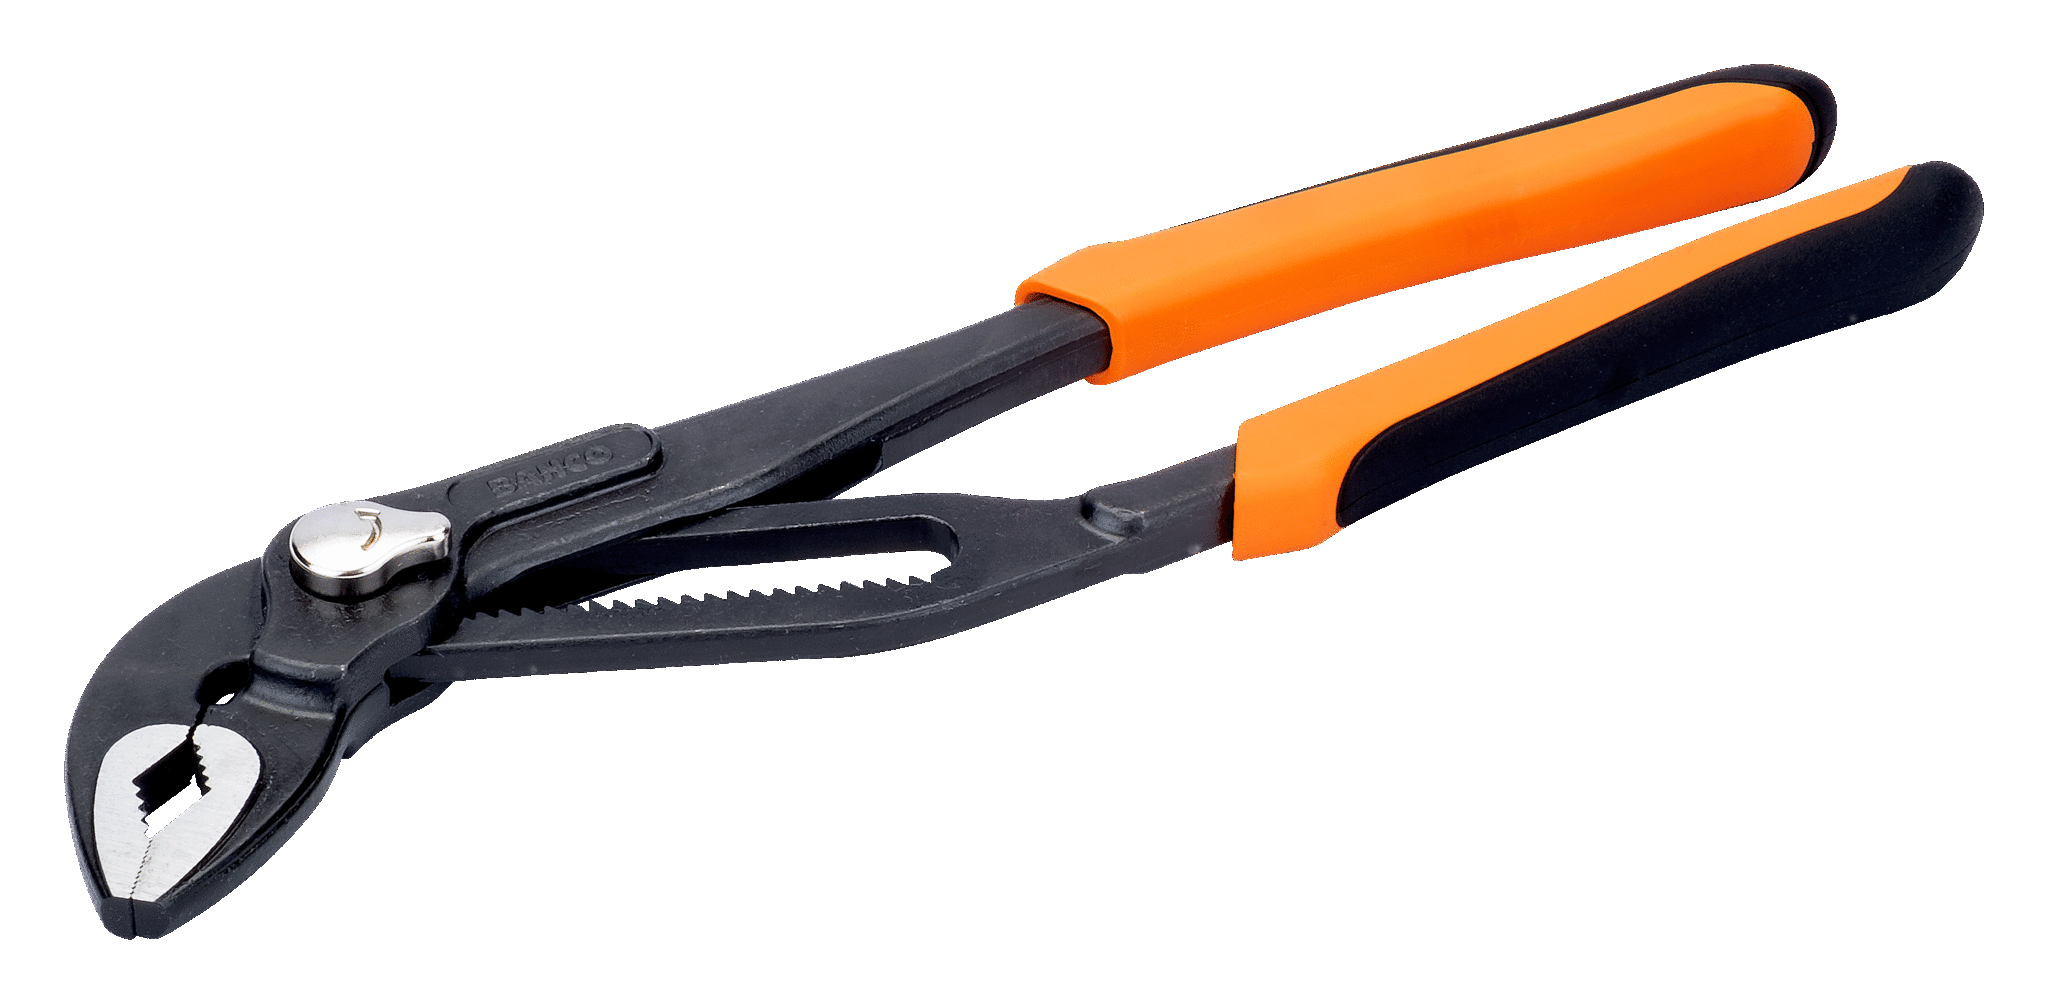 Quick Adjust Slip Joint Water Pump Pliers with Phosphate Finish - 7225 by Bahco